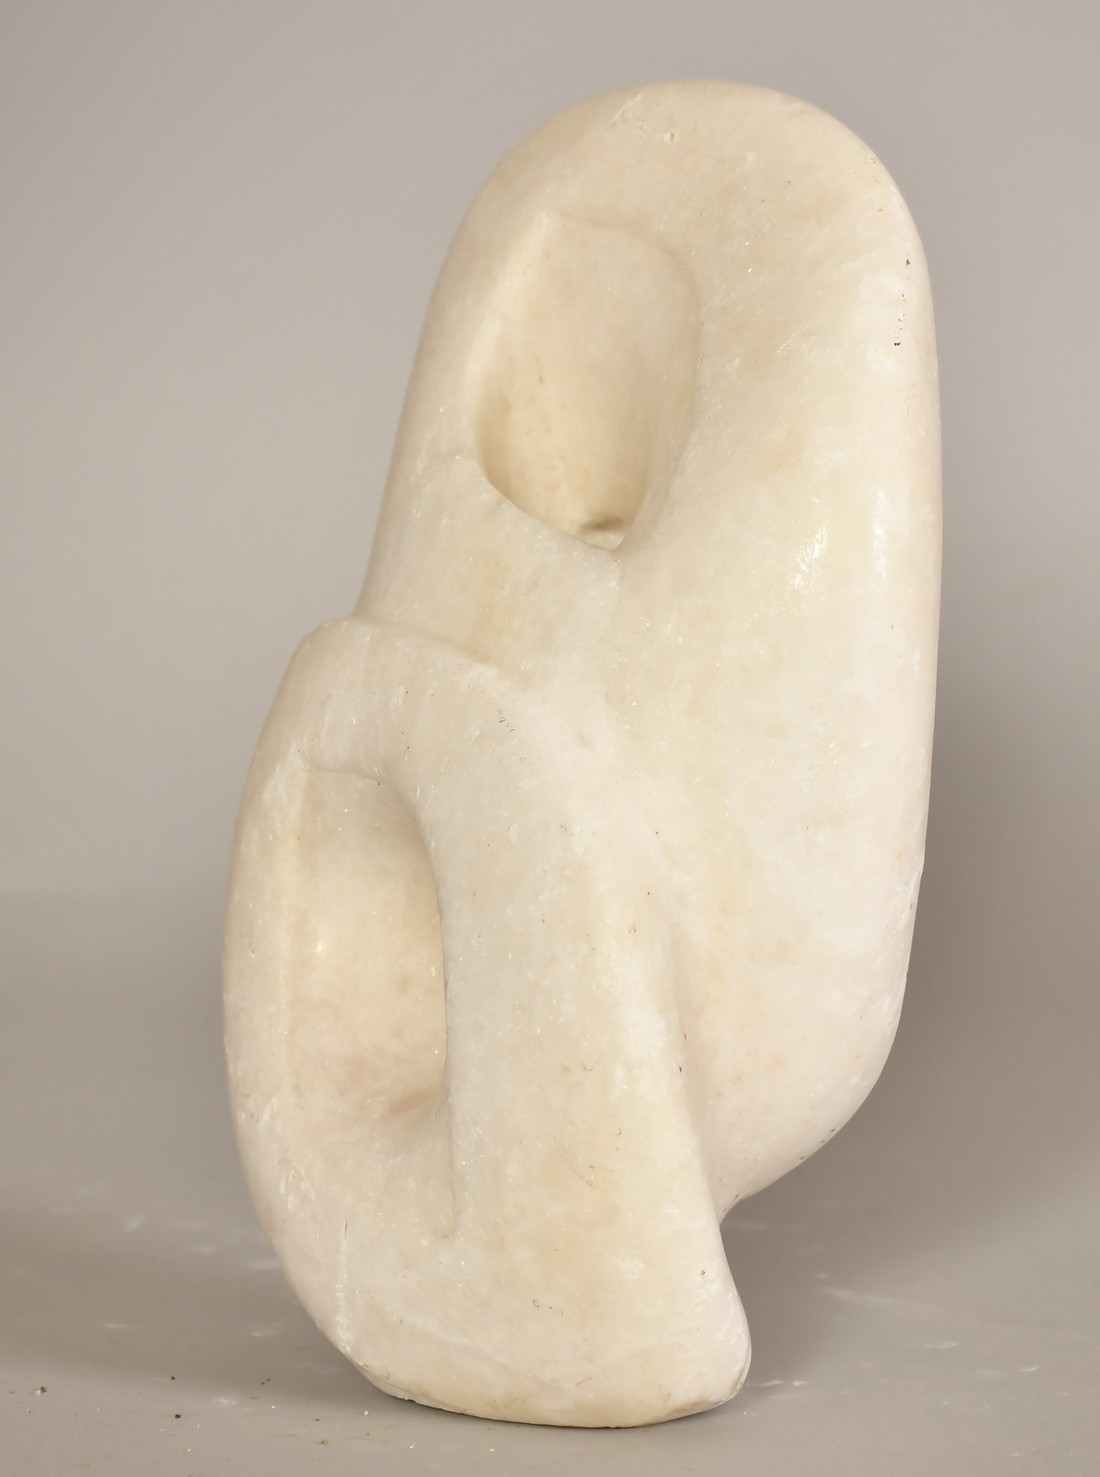 Sally Hersh (1936-2010), Hear no evil, alabaster, 9" (23cm) high overall. - Image 3 of 4